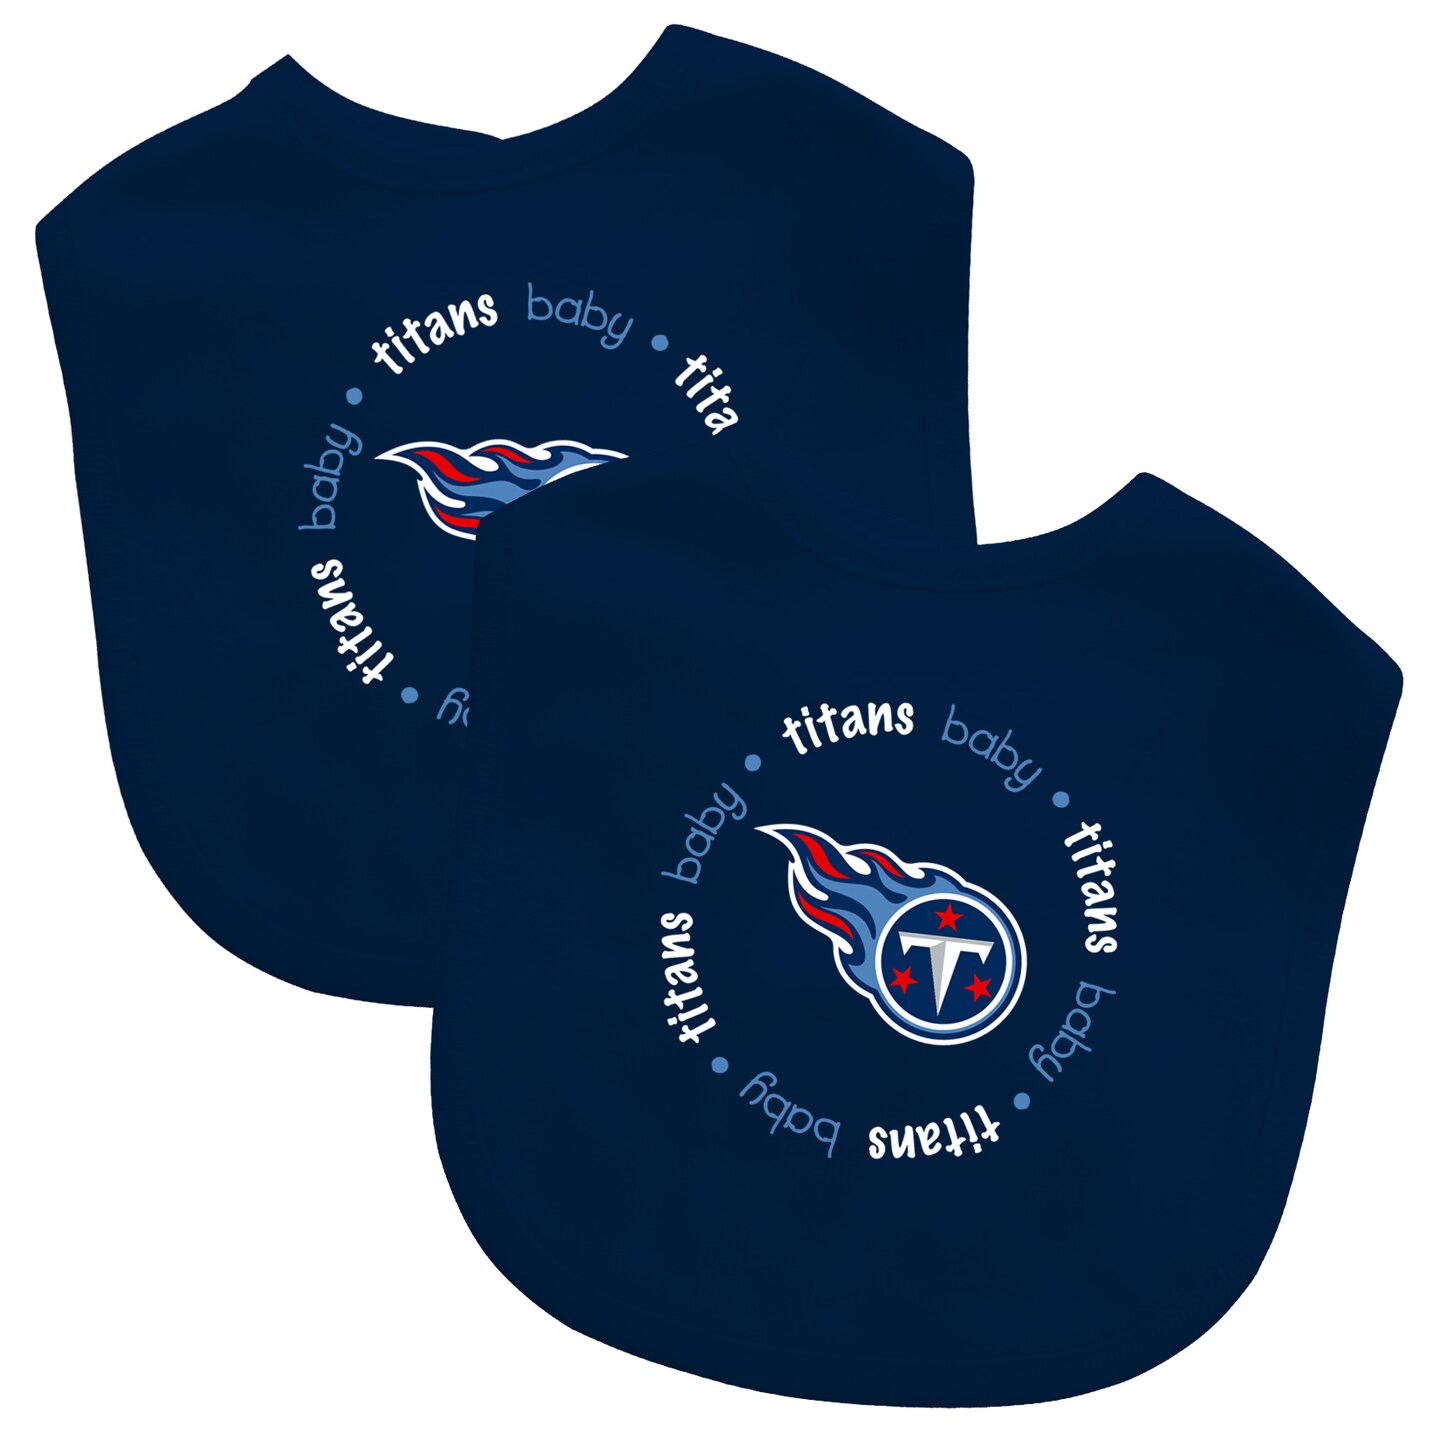 Baby Fanatic Officially Licensed Unisex Baby Bibs 2 Pack - NFL Tennessee  Titans Baby Apparel Set